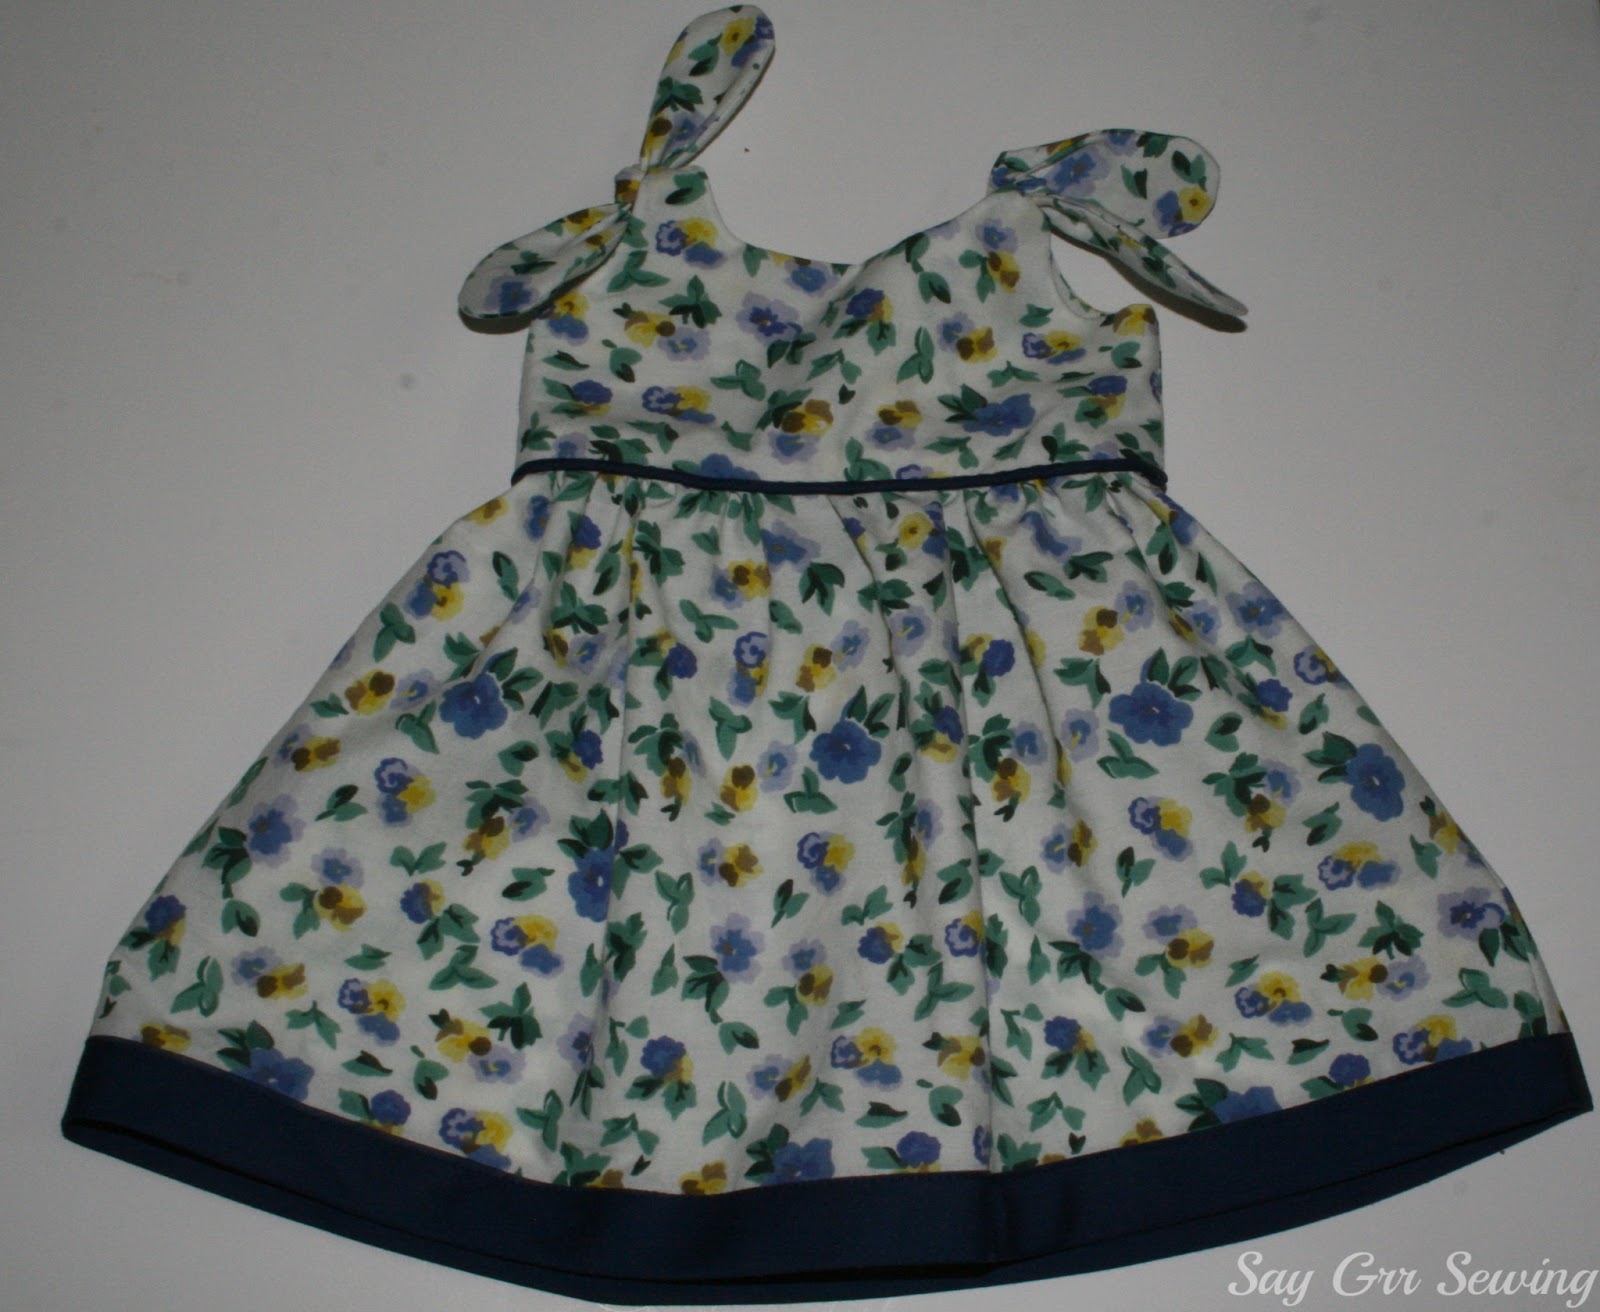 Say Grr Sewing: Itty Bitty Baby Dress For Beckers